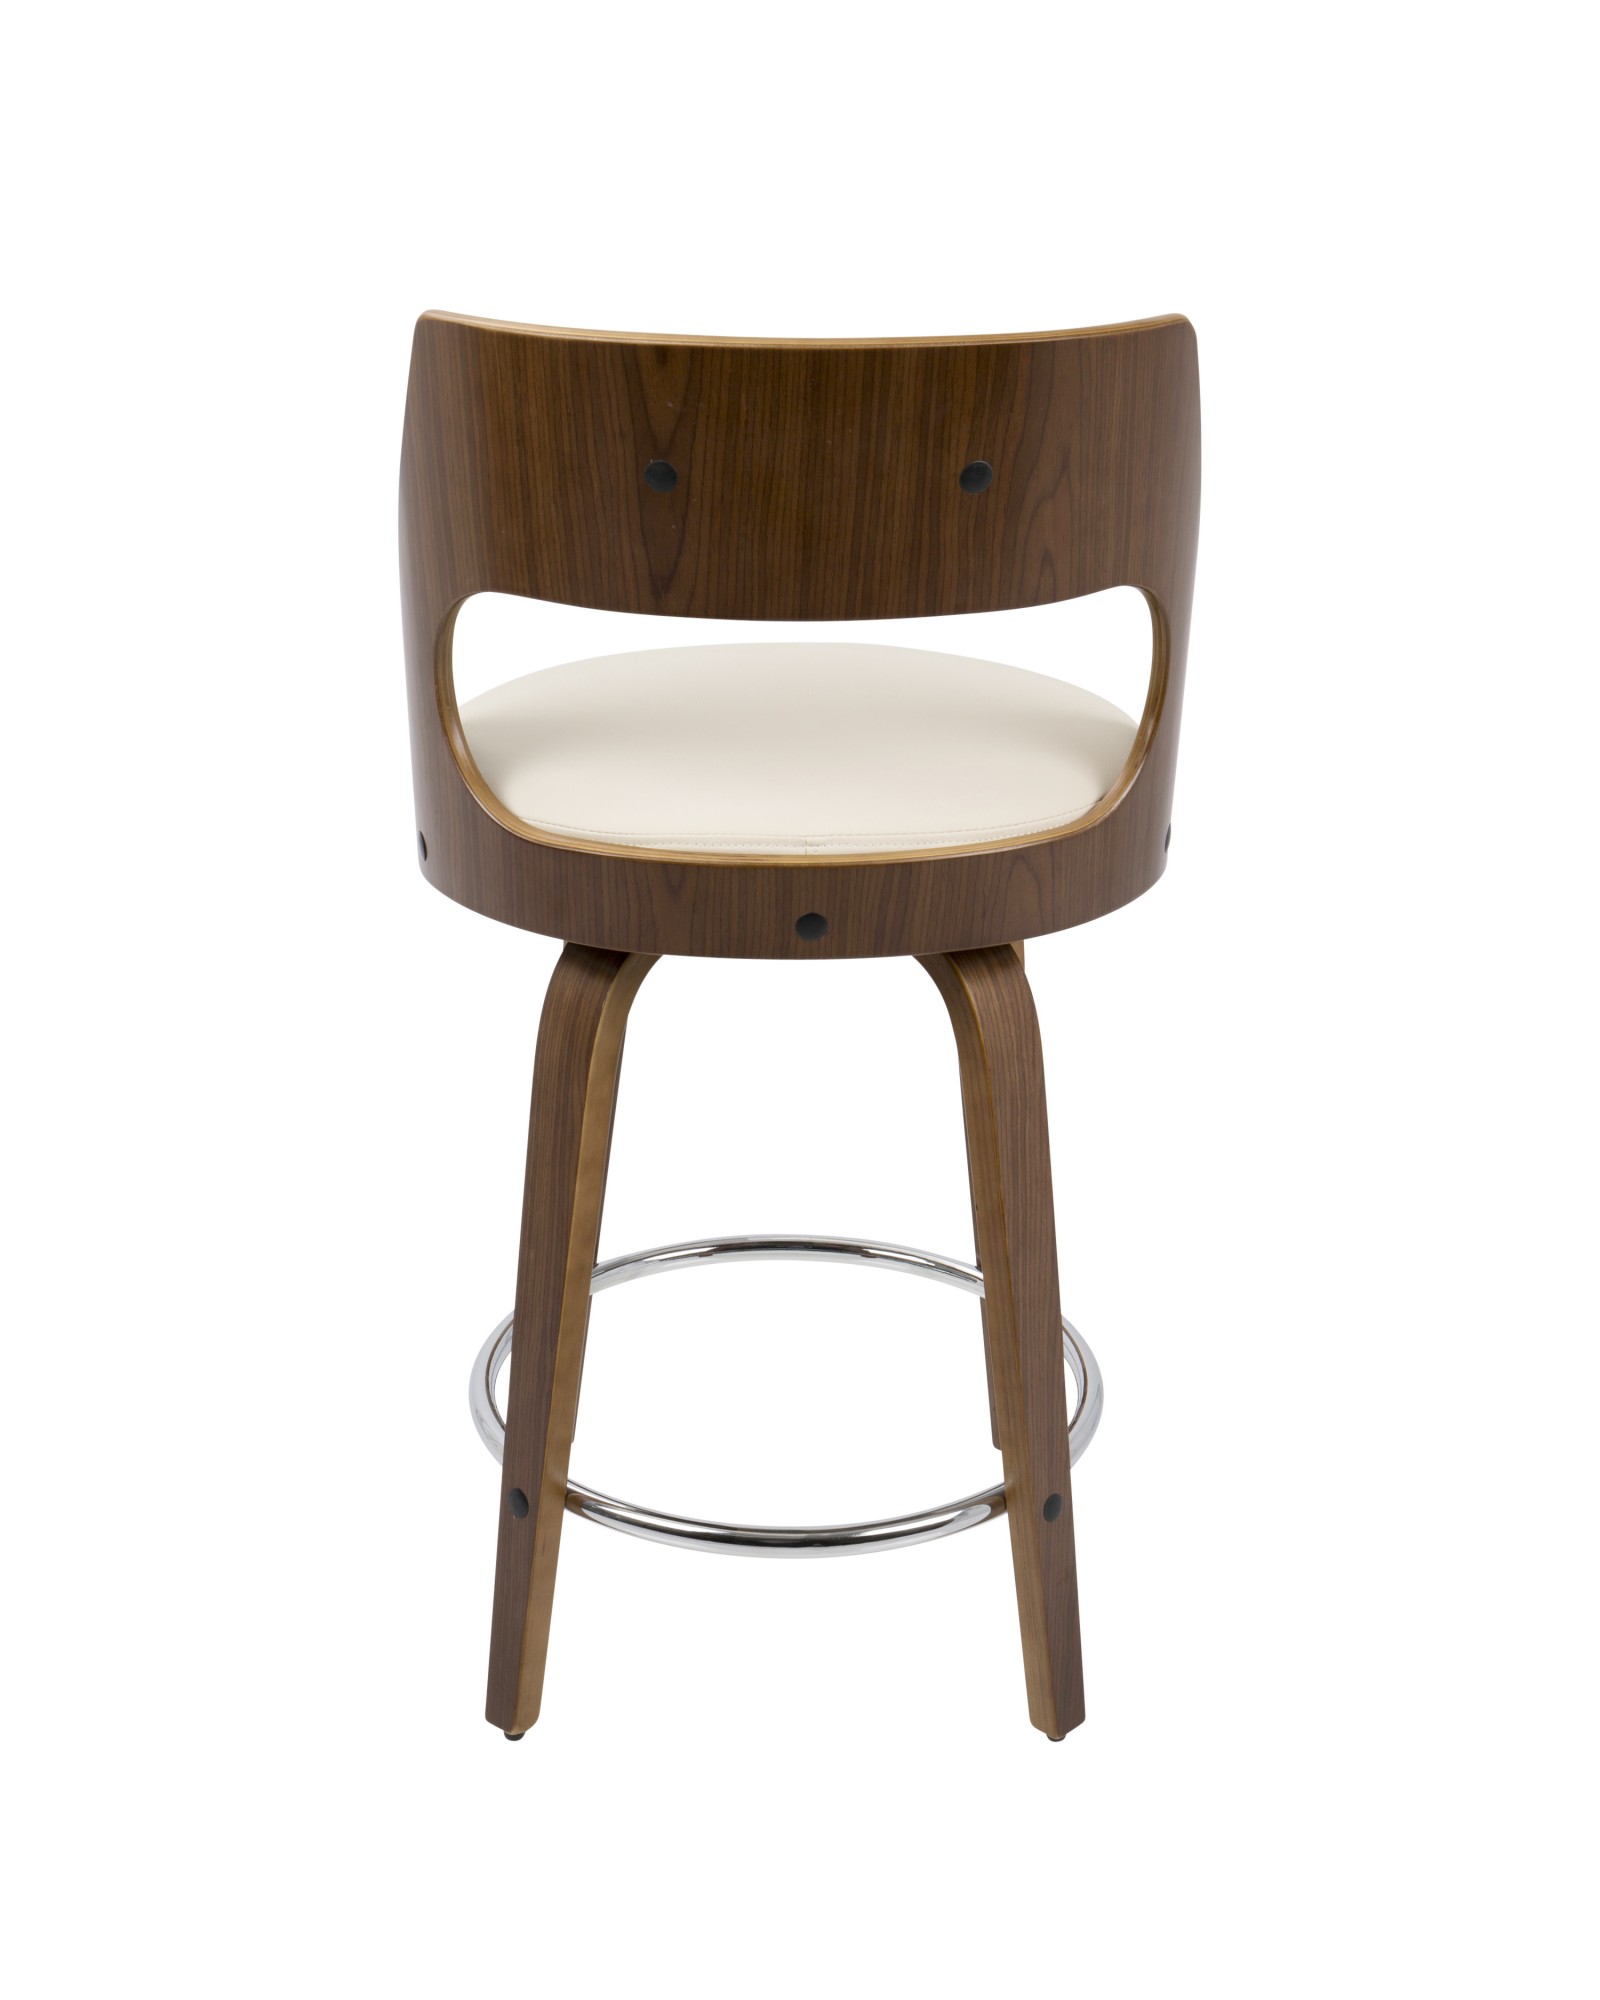 Cecina Mid-Century Modern Counter Stool with Swivel in Walnut And Cream Faux Leather